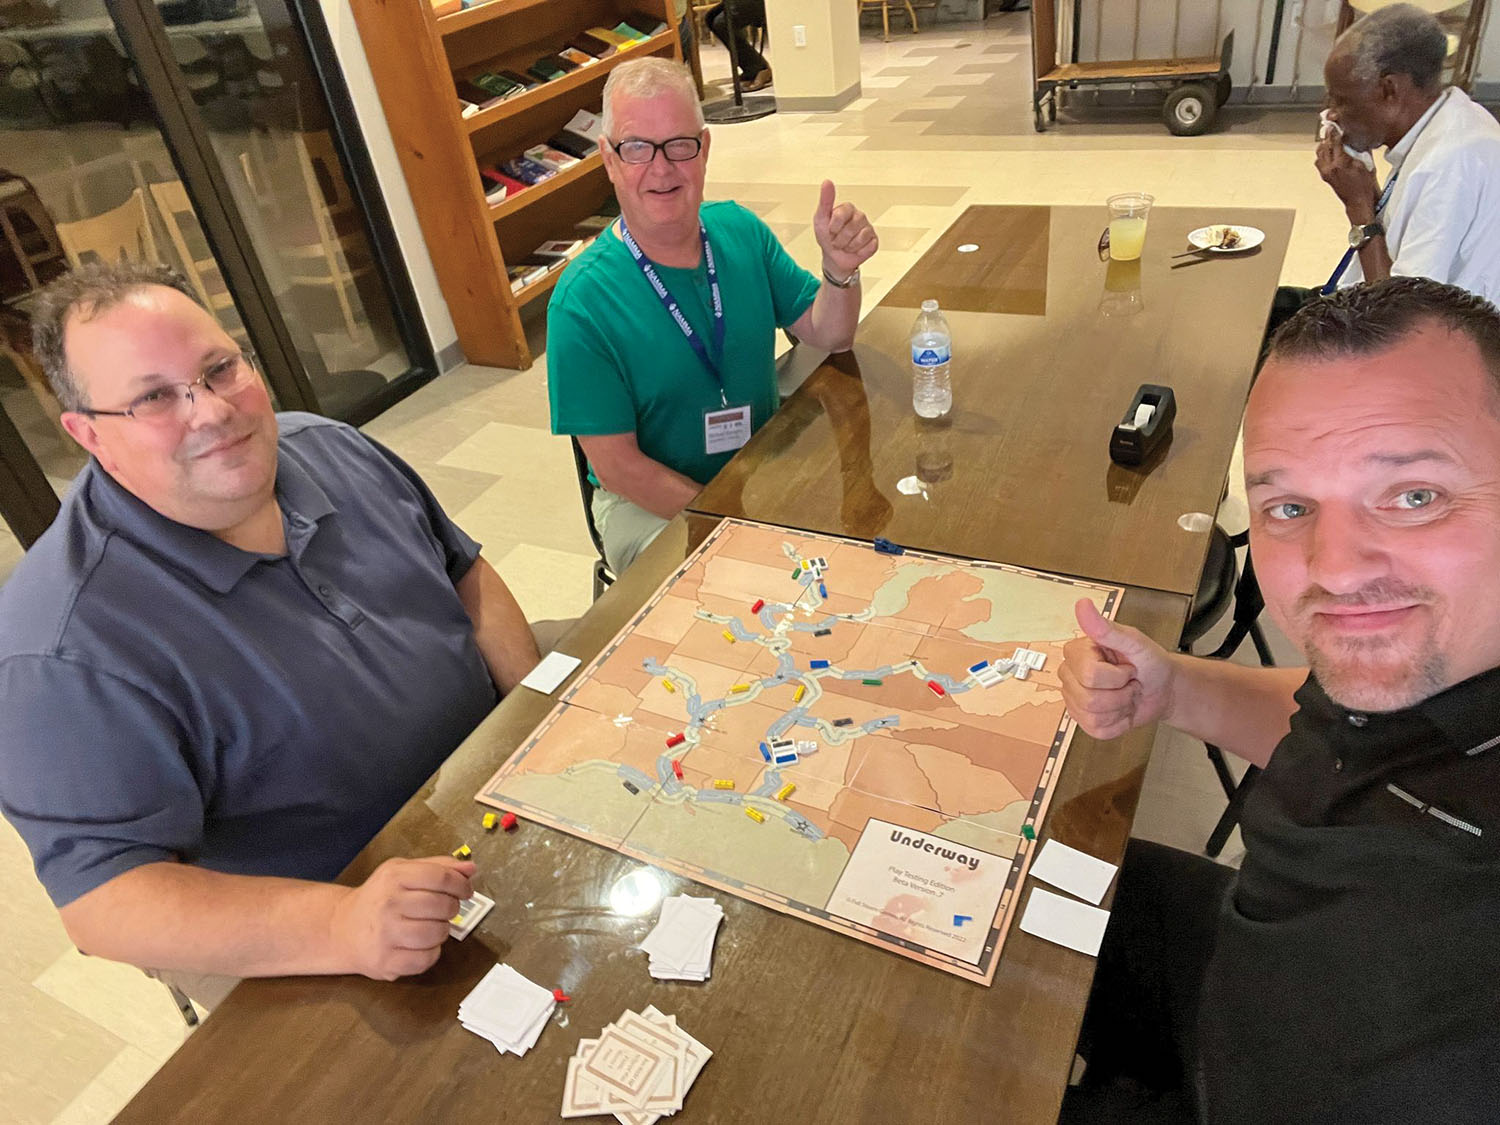 Seamen’s Church Institute NAMMA director Jason Zuidma and SCI chaplains play test the board game Underway in an Introduction To Seafarers’ Welfare and Maritime Ministry class at the Houston International Seafarers Center recently. (Photo courtesy of Matthew Hyner)